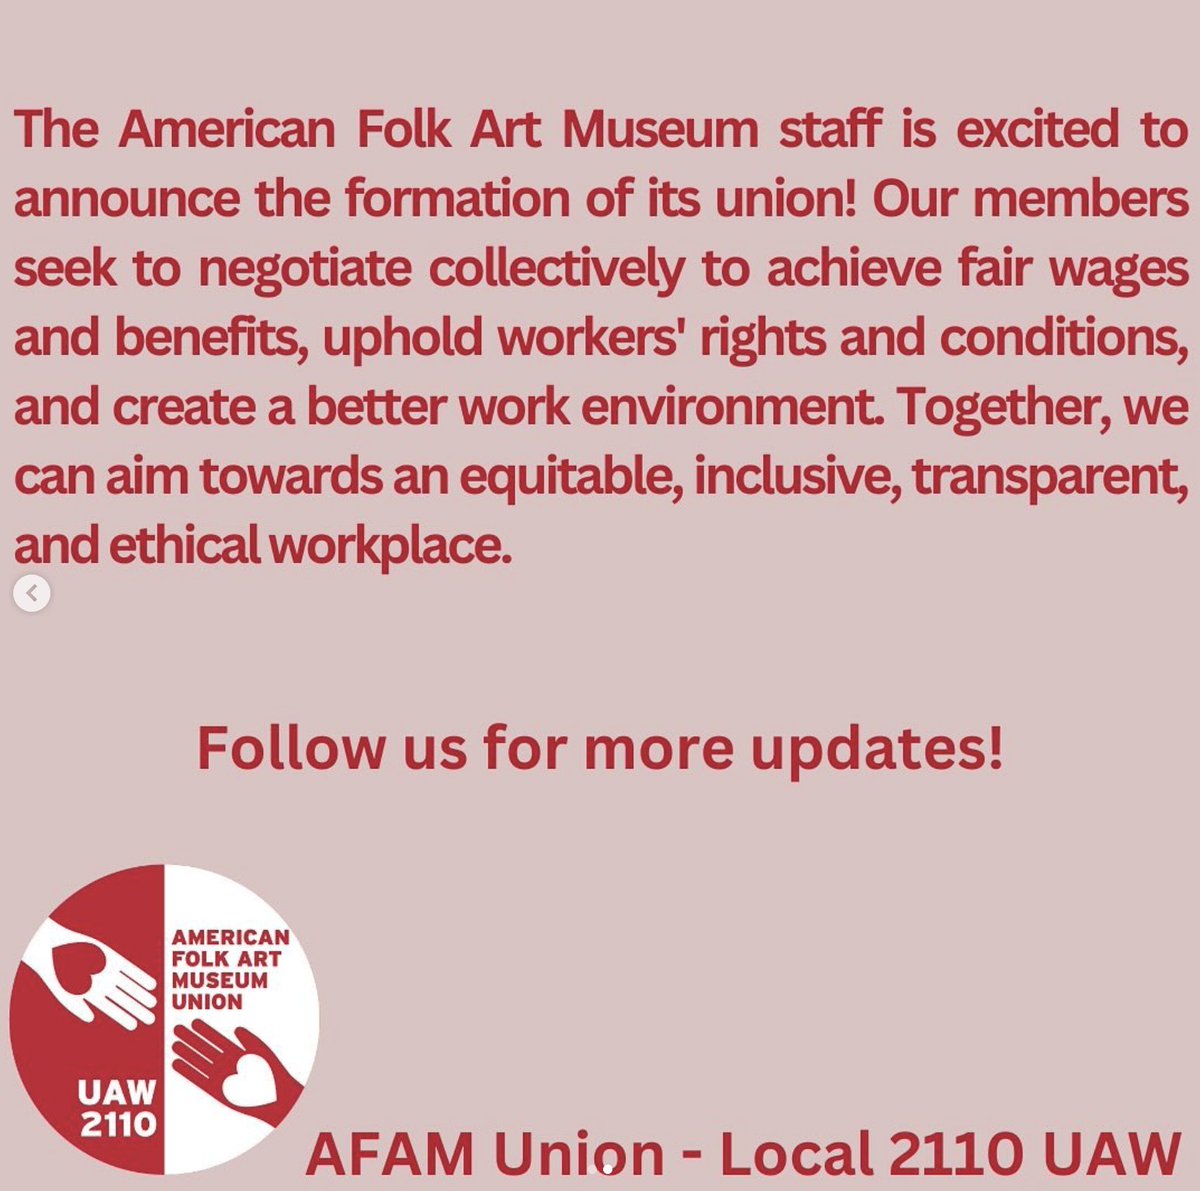 Huge congrats to the workers of the American Folk Art Museum who announced the formation of their @UAW union today! They're not on here but give them a follow on Instagram (instagram.com/afam_union/). @Local2110UAW @UAWRegion9A